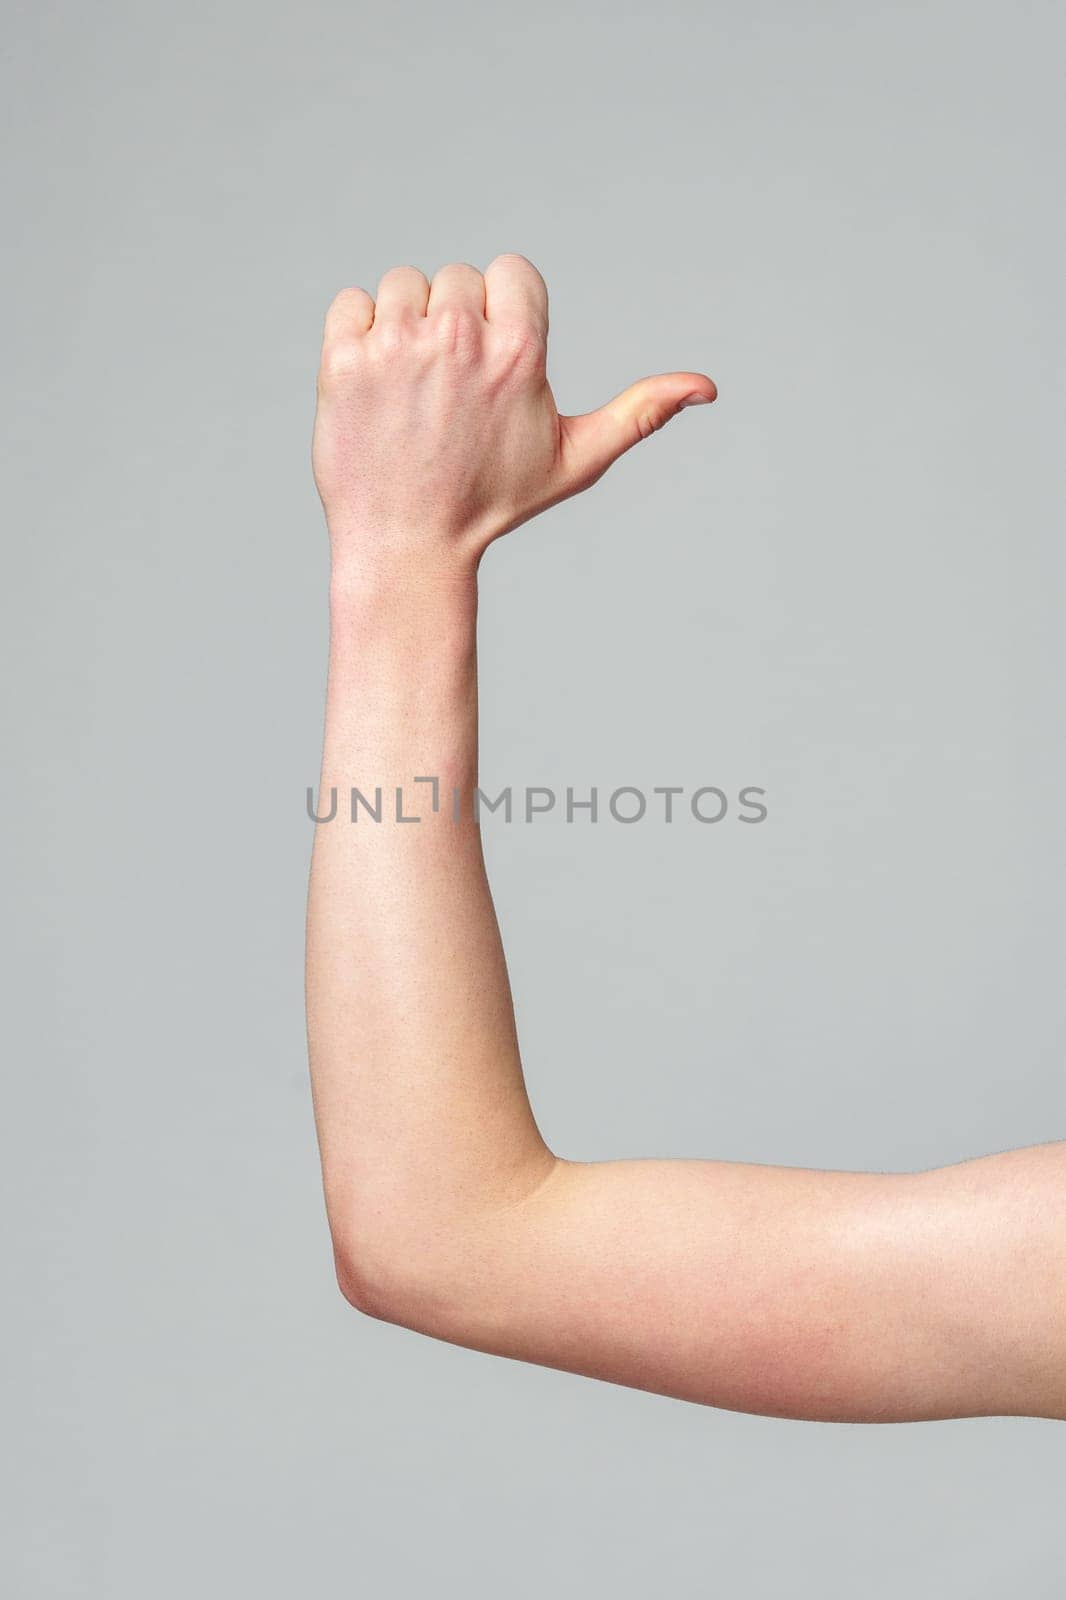 A persons forearm is shown flexed at the elbow with the fist clenched, highlighting the muscles and tendons of the human arm. The forearm is positioned against a neutral gray backdrop, emphasizing the anatomy and physical fitness.